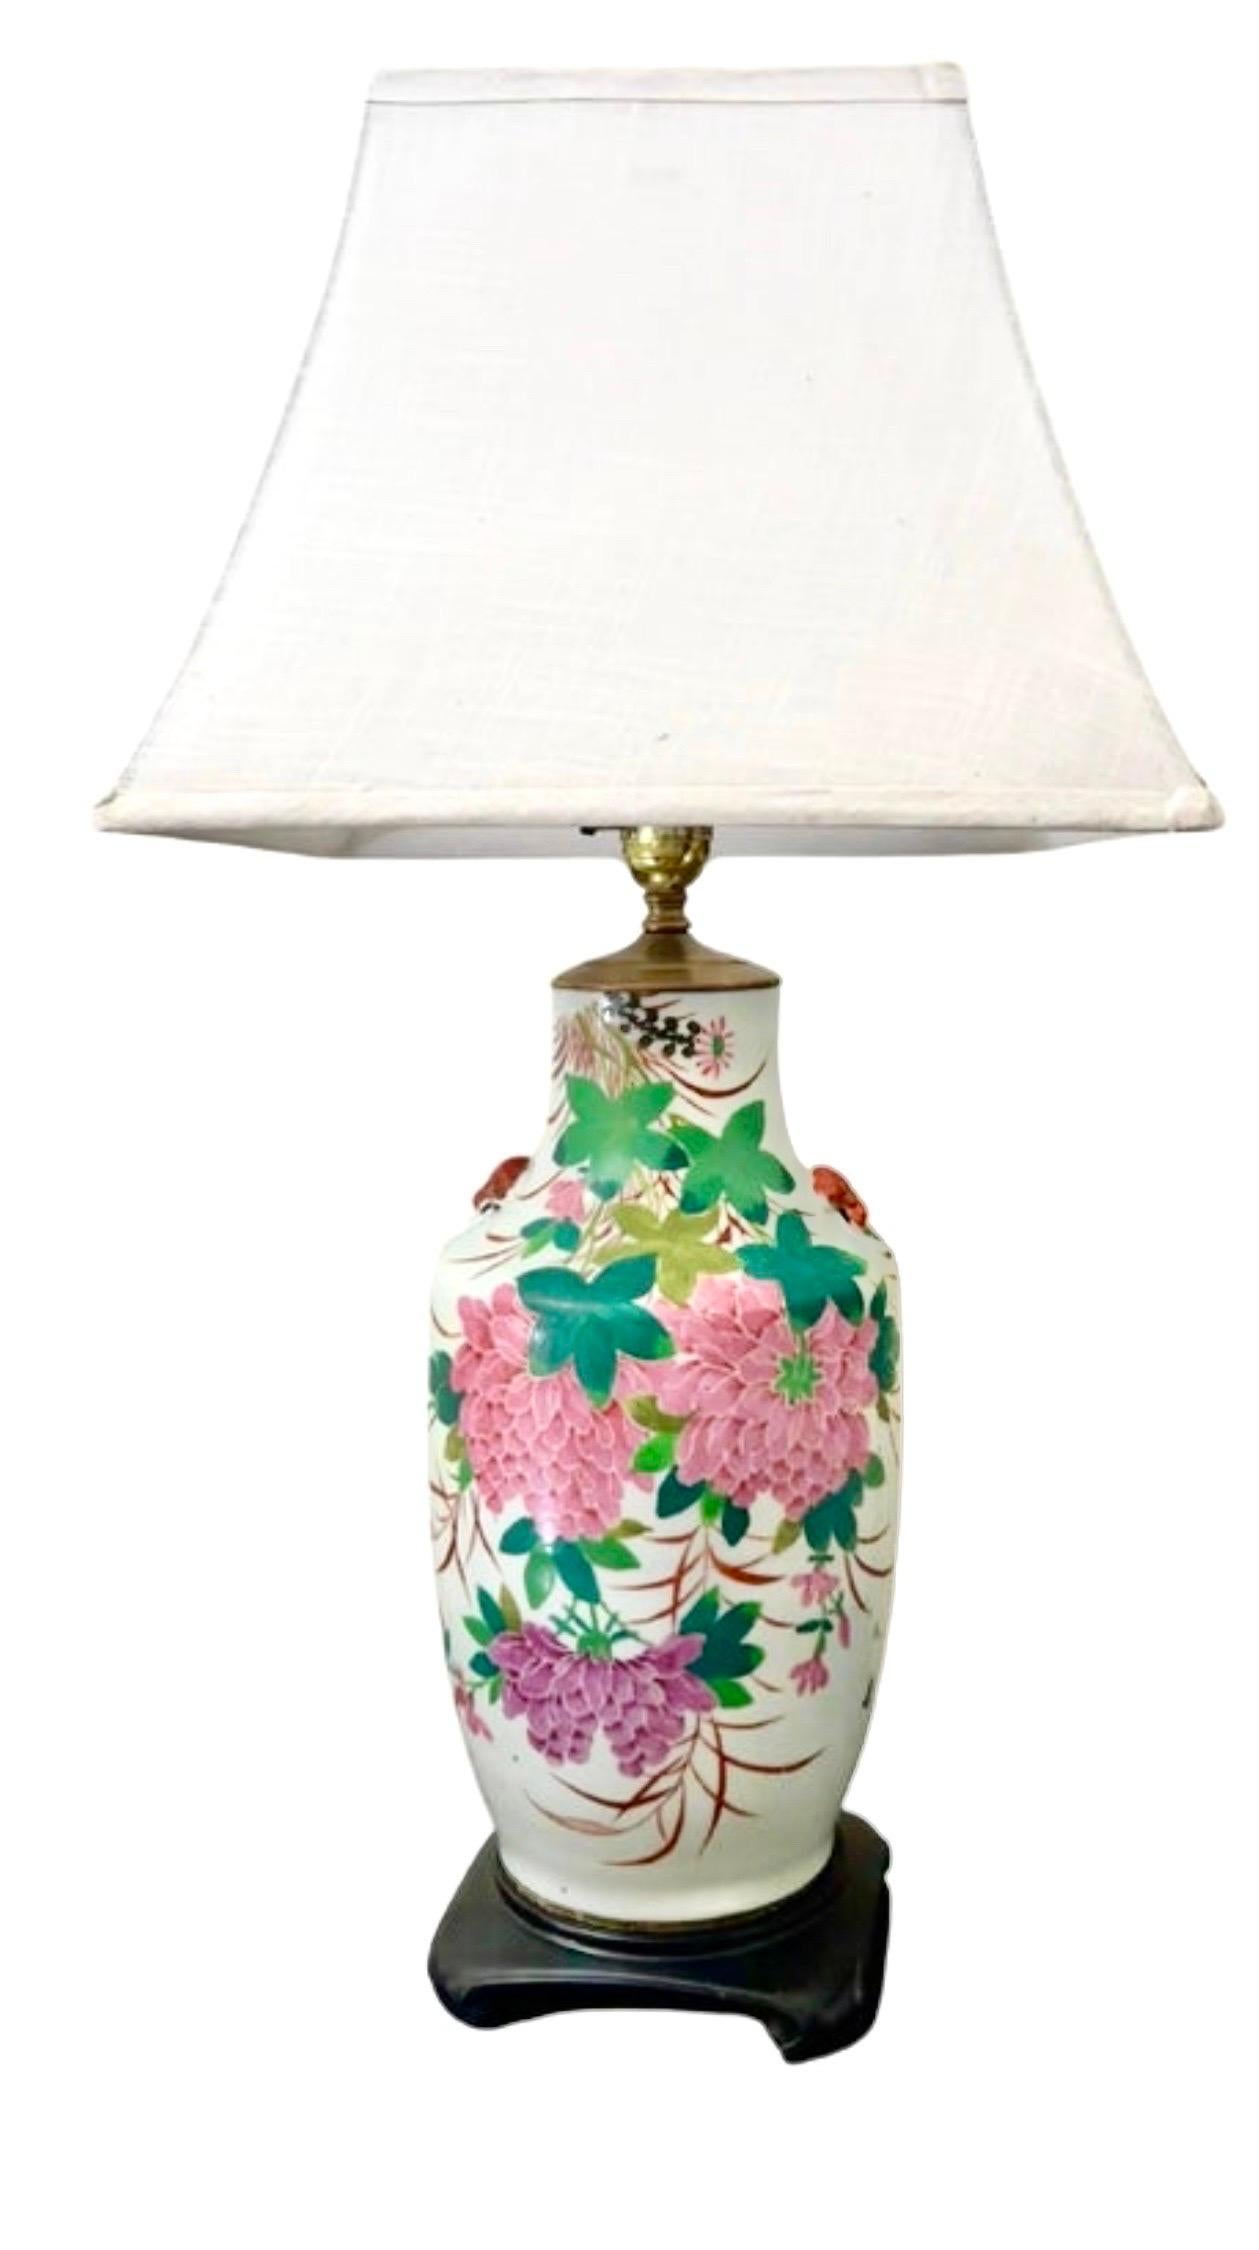 Chinese Deco Chrysanthemum Porcelain Lamp, Hollywood Regency, Early 20th Century For Sale